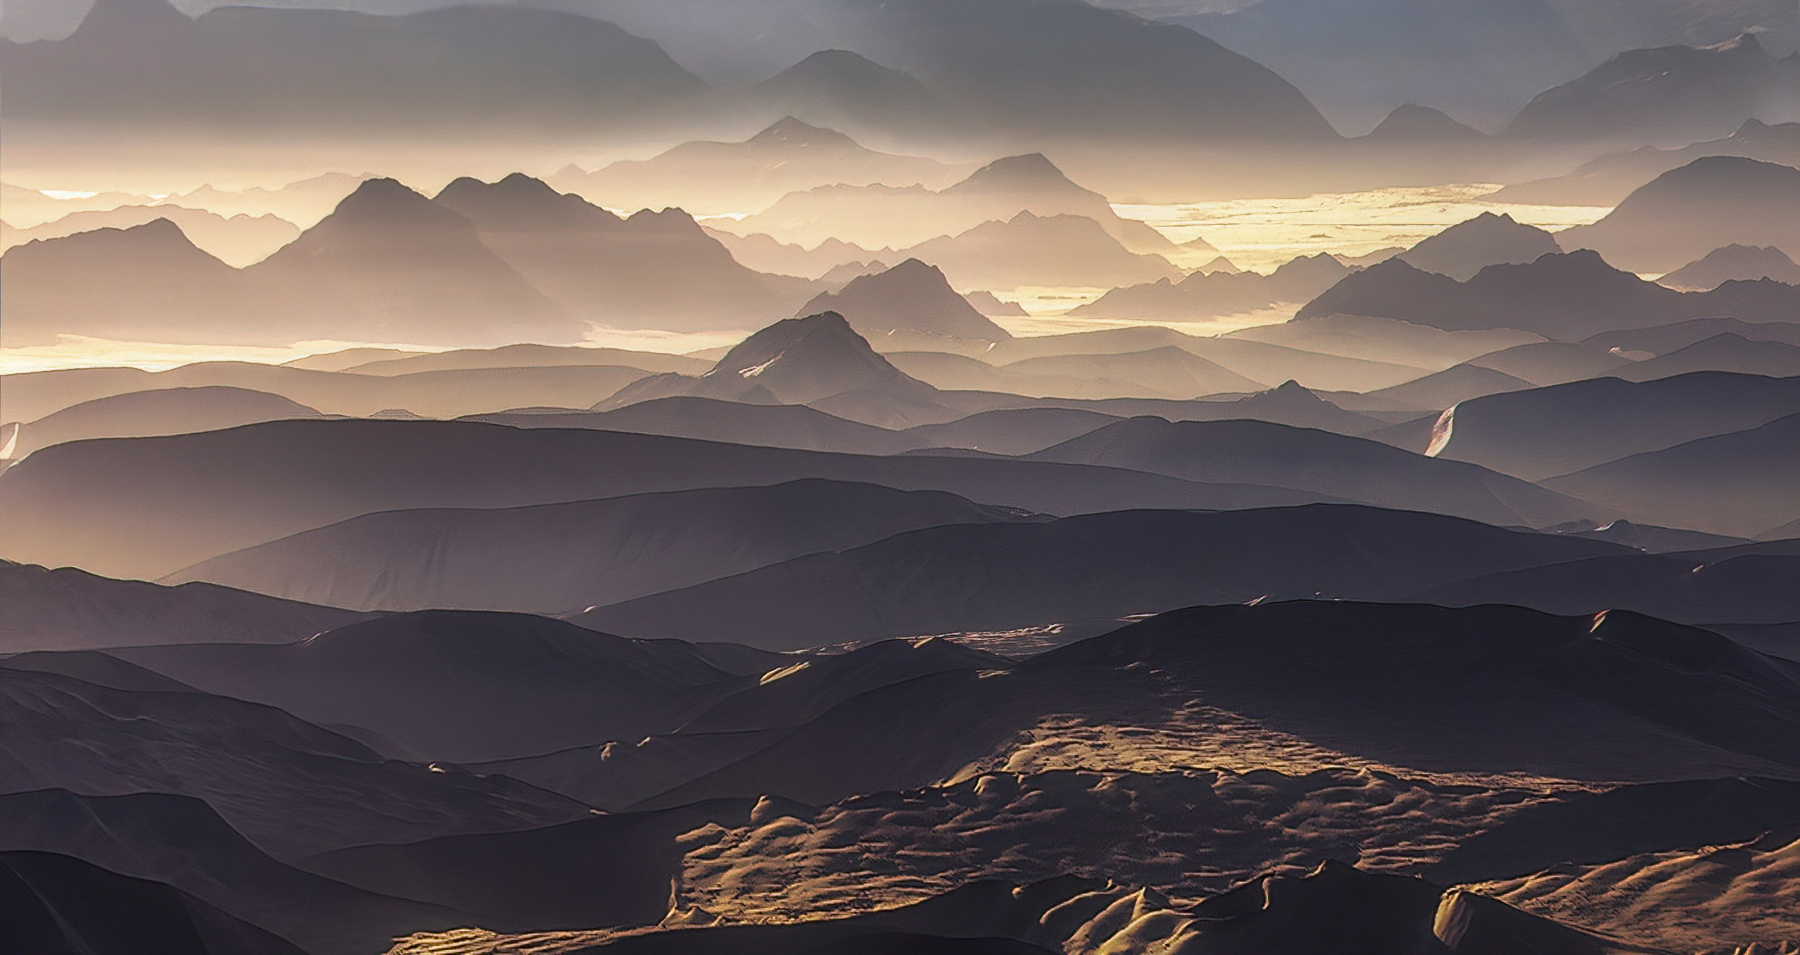 Layers of dunes and peaks through a telephoto lens in morning light, Namibia